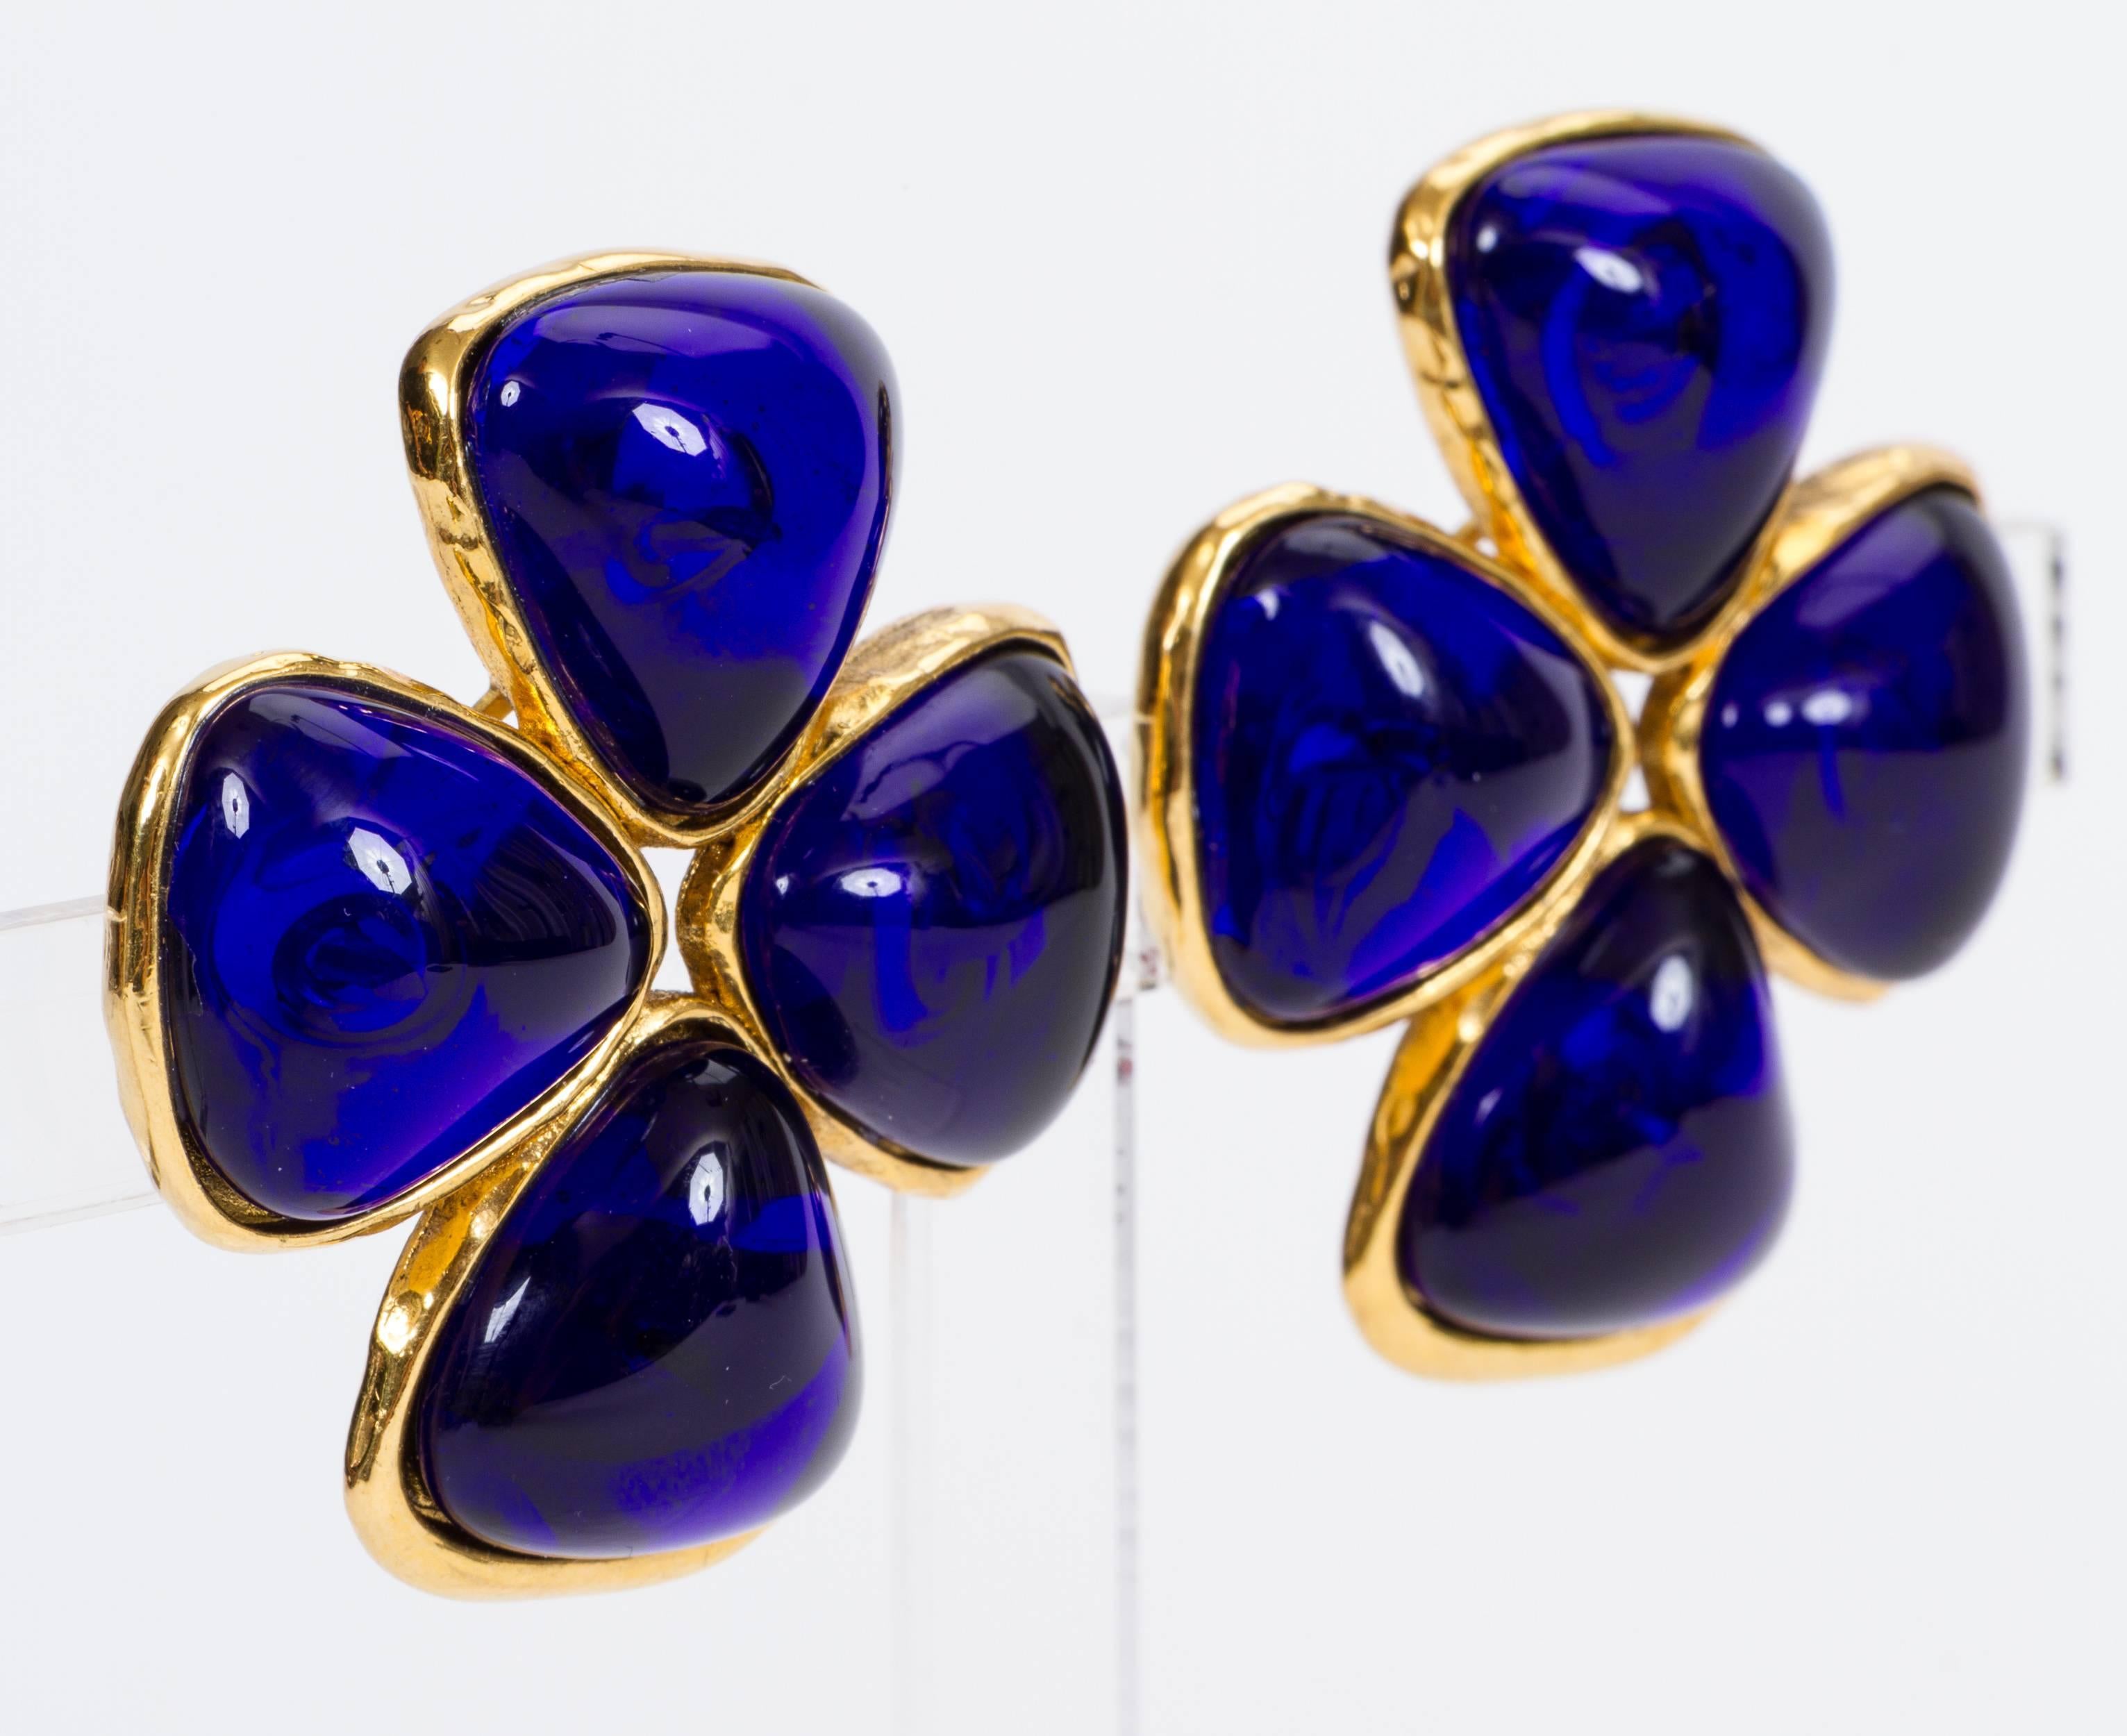 Chanel collection 26 mid 80s blue gripoix clover clip earrings. Excellent condition. Come with original box.